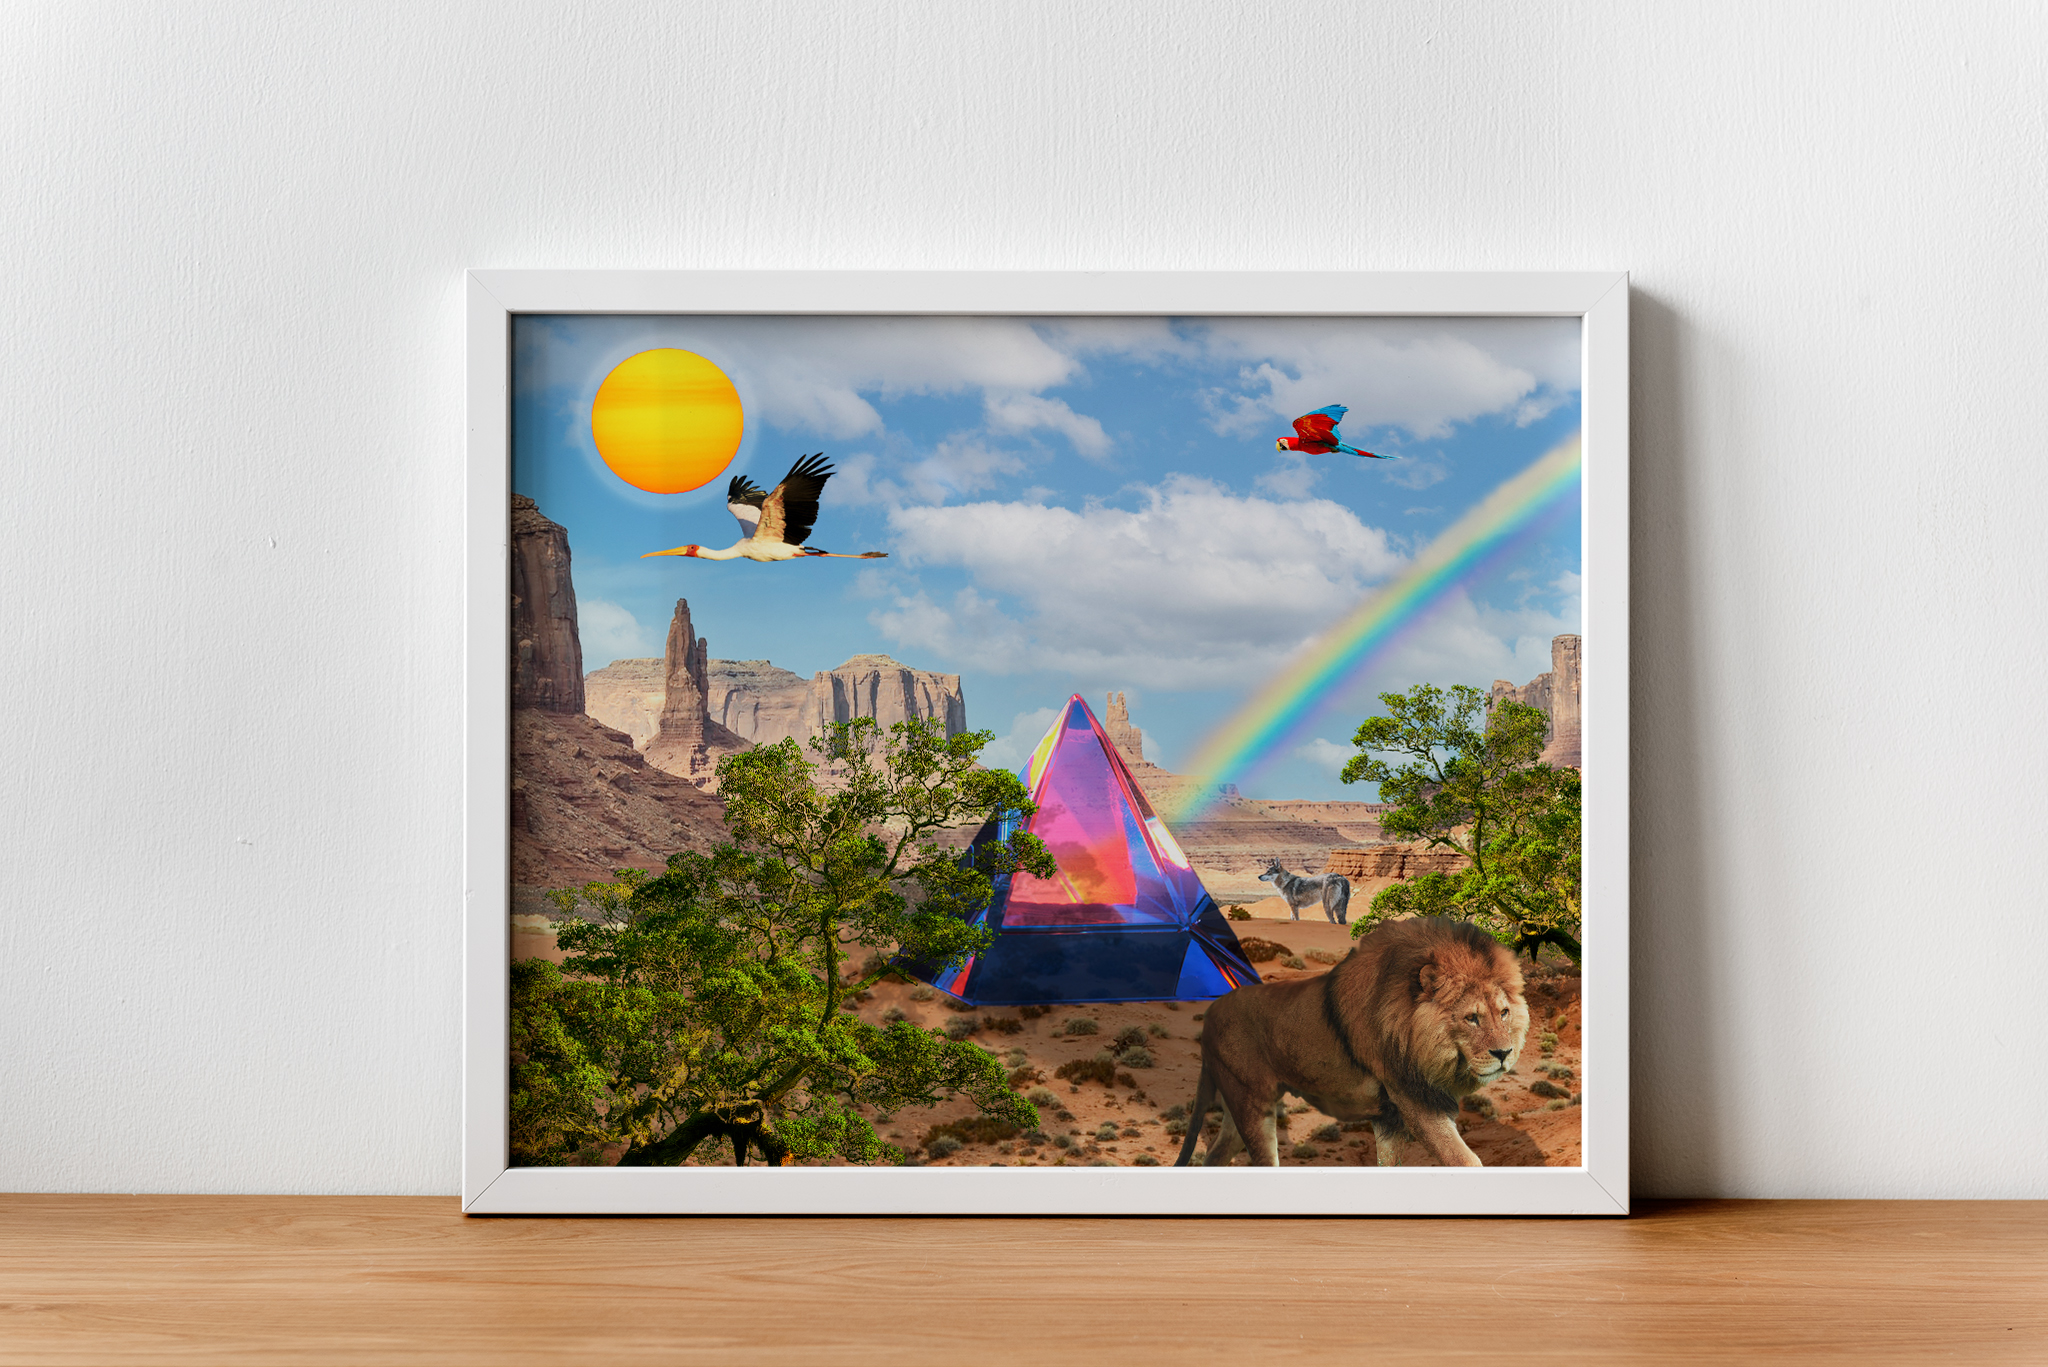 an image showing a rainbow translucent triangle in the middle with animals in the foreground and background